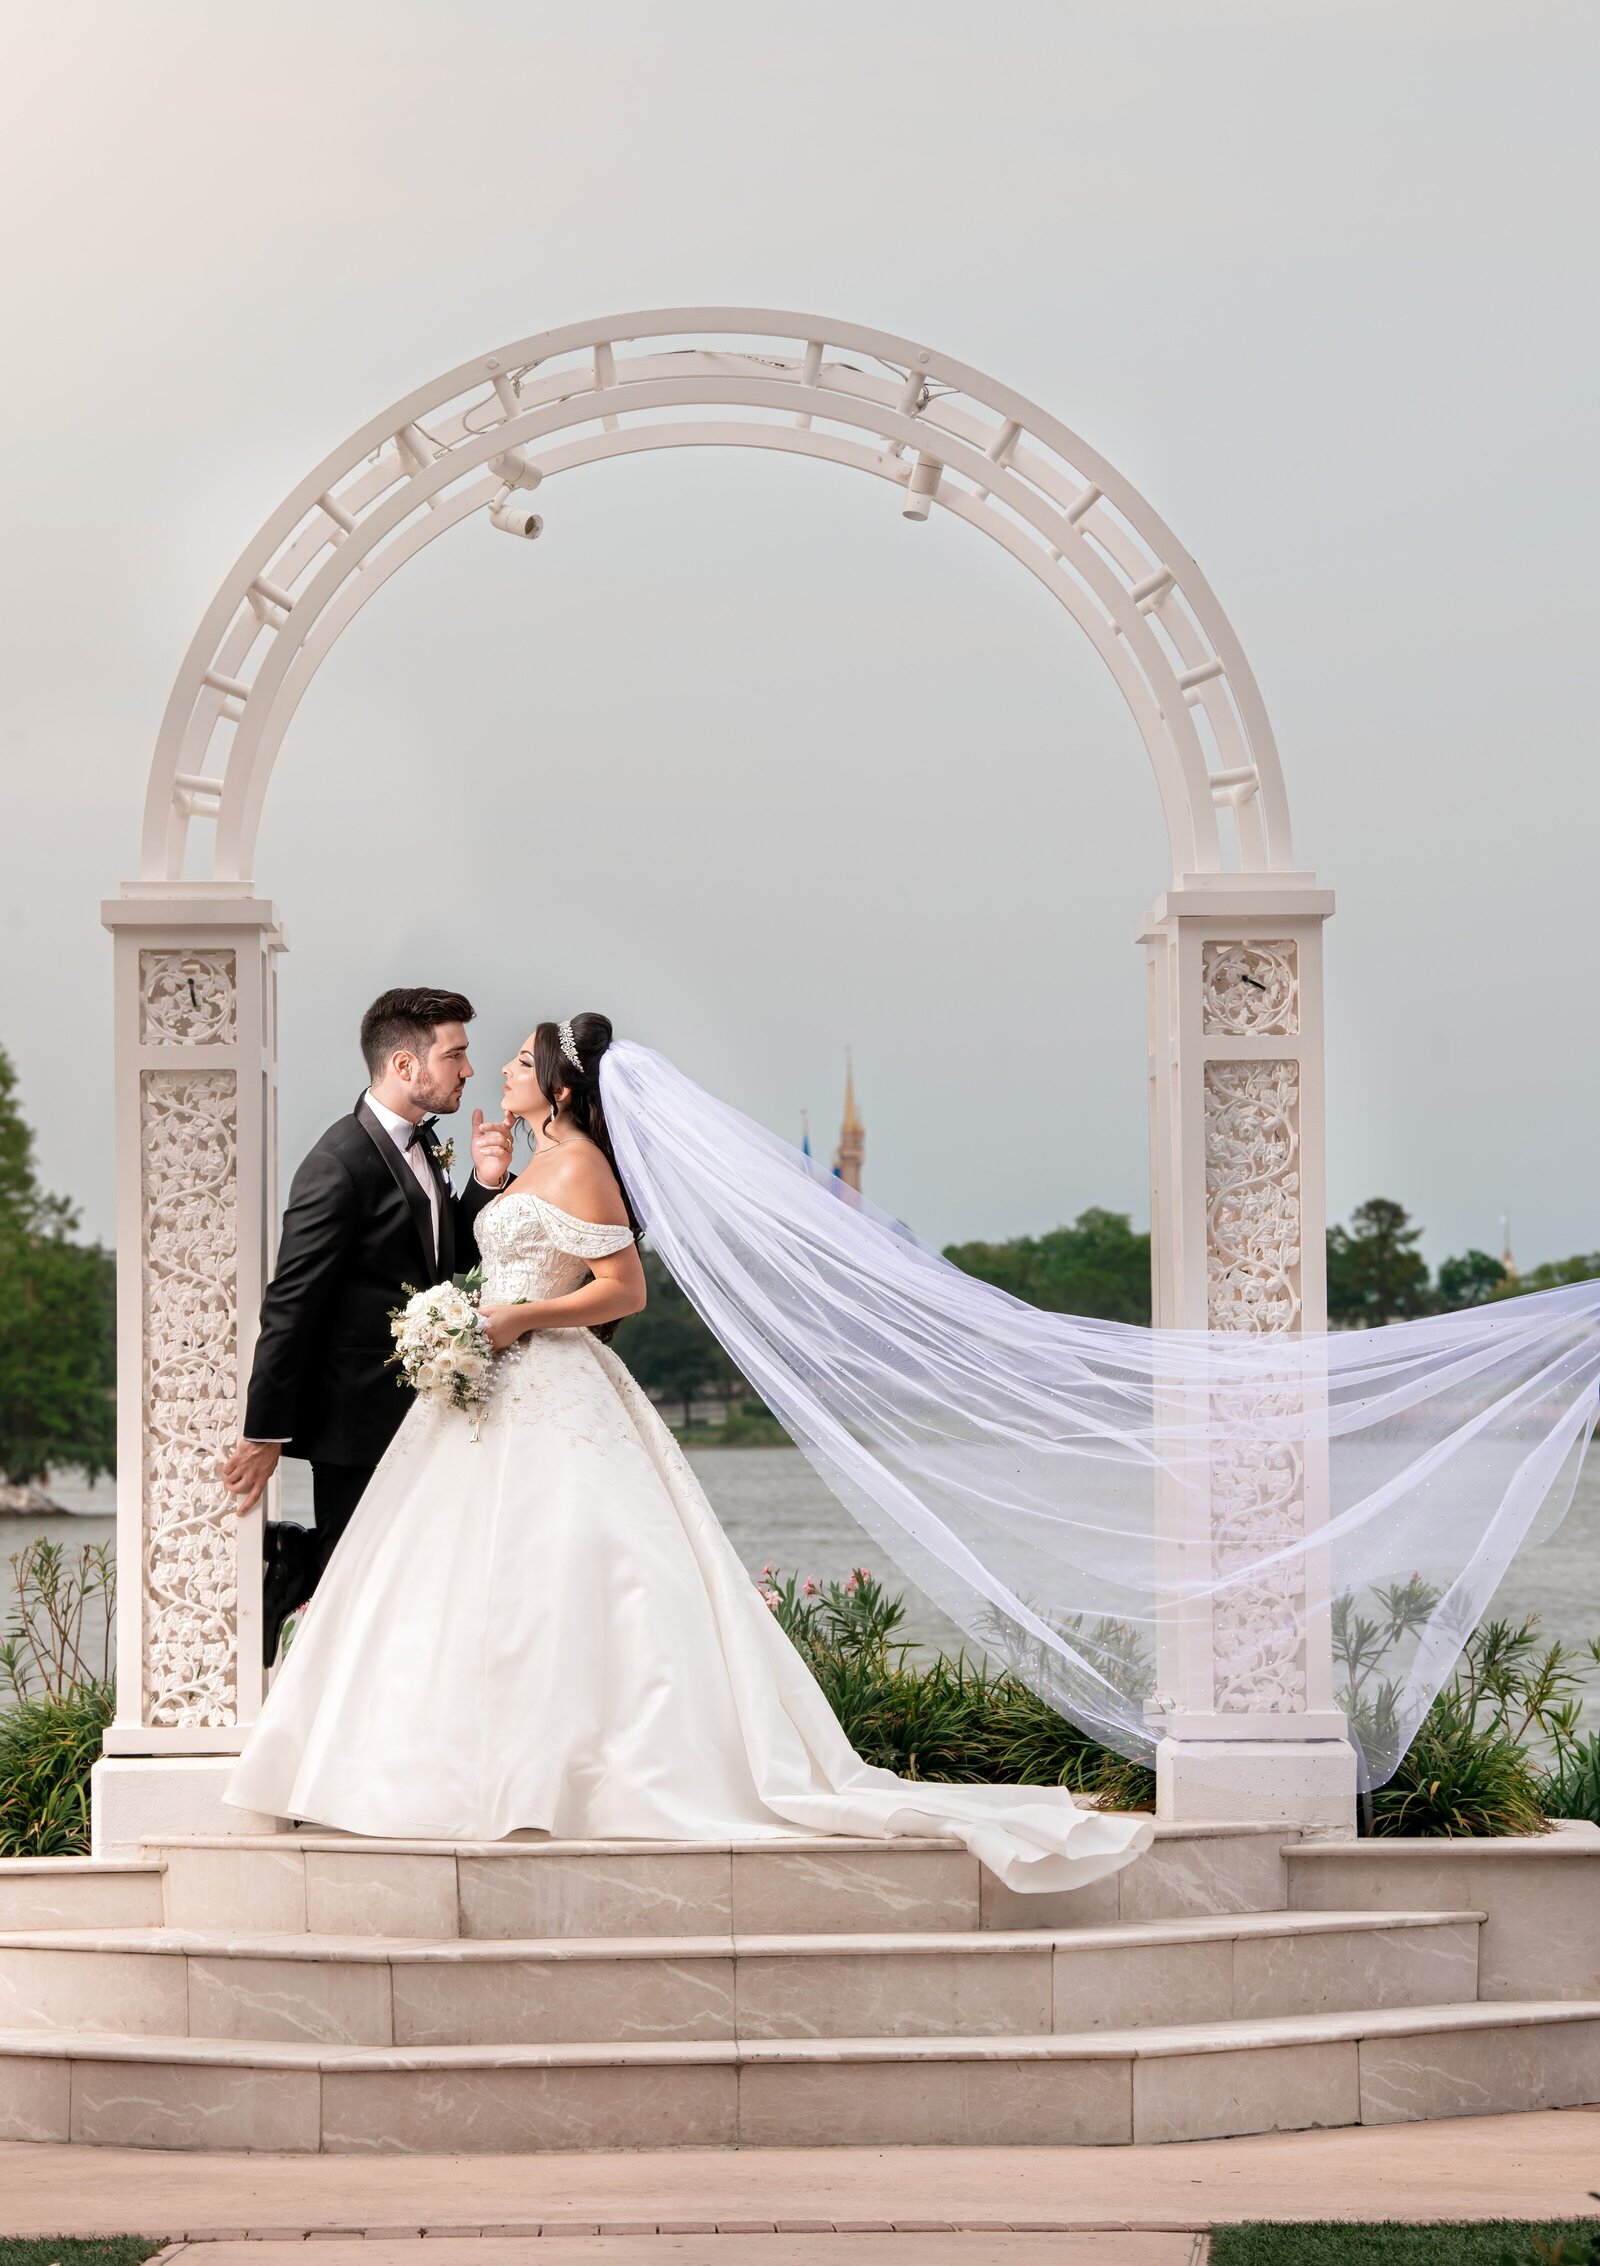 Step into a world of whimsy and wonder with our Disney World wedding photography. From Cinderella's Castle to hidden corners of magic, we'll capture the fairy tale essence of your Disney dream wedding.